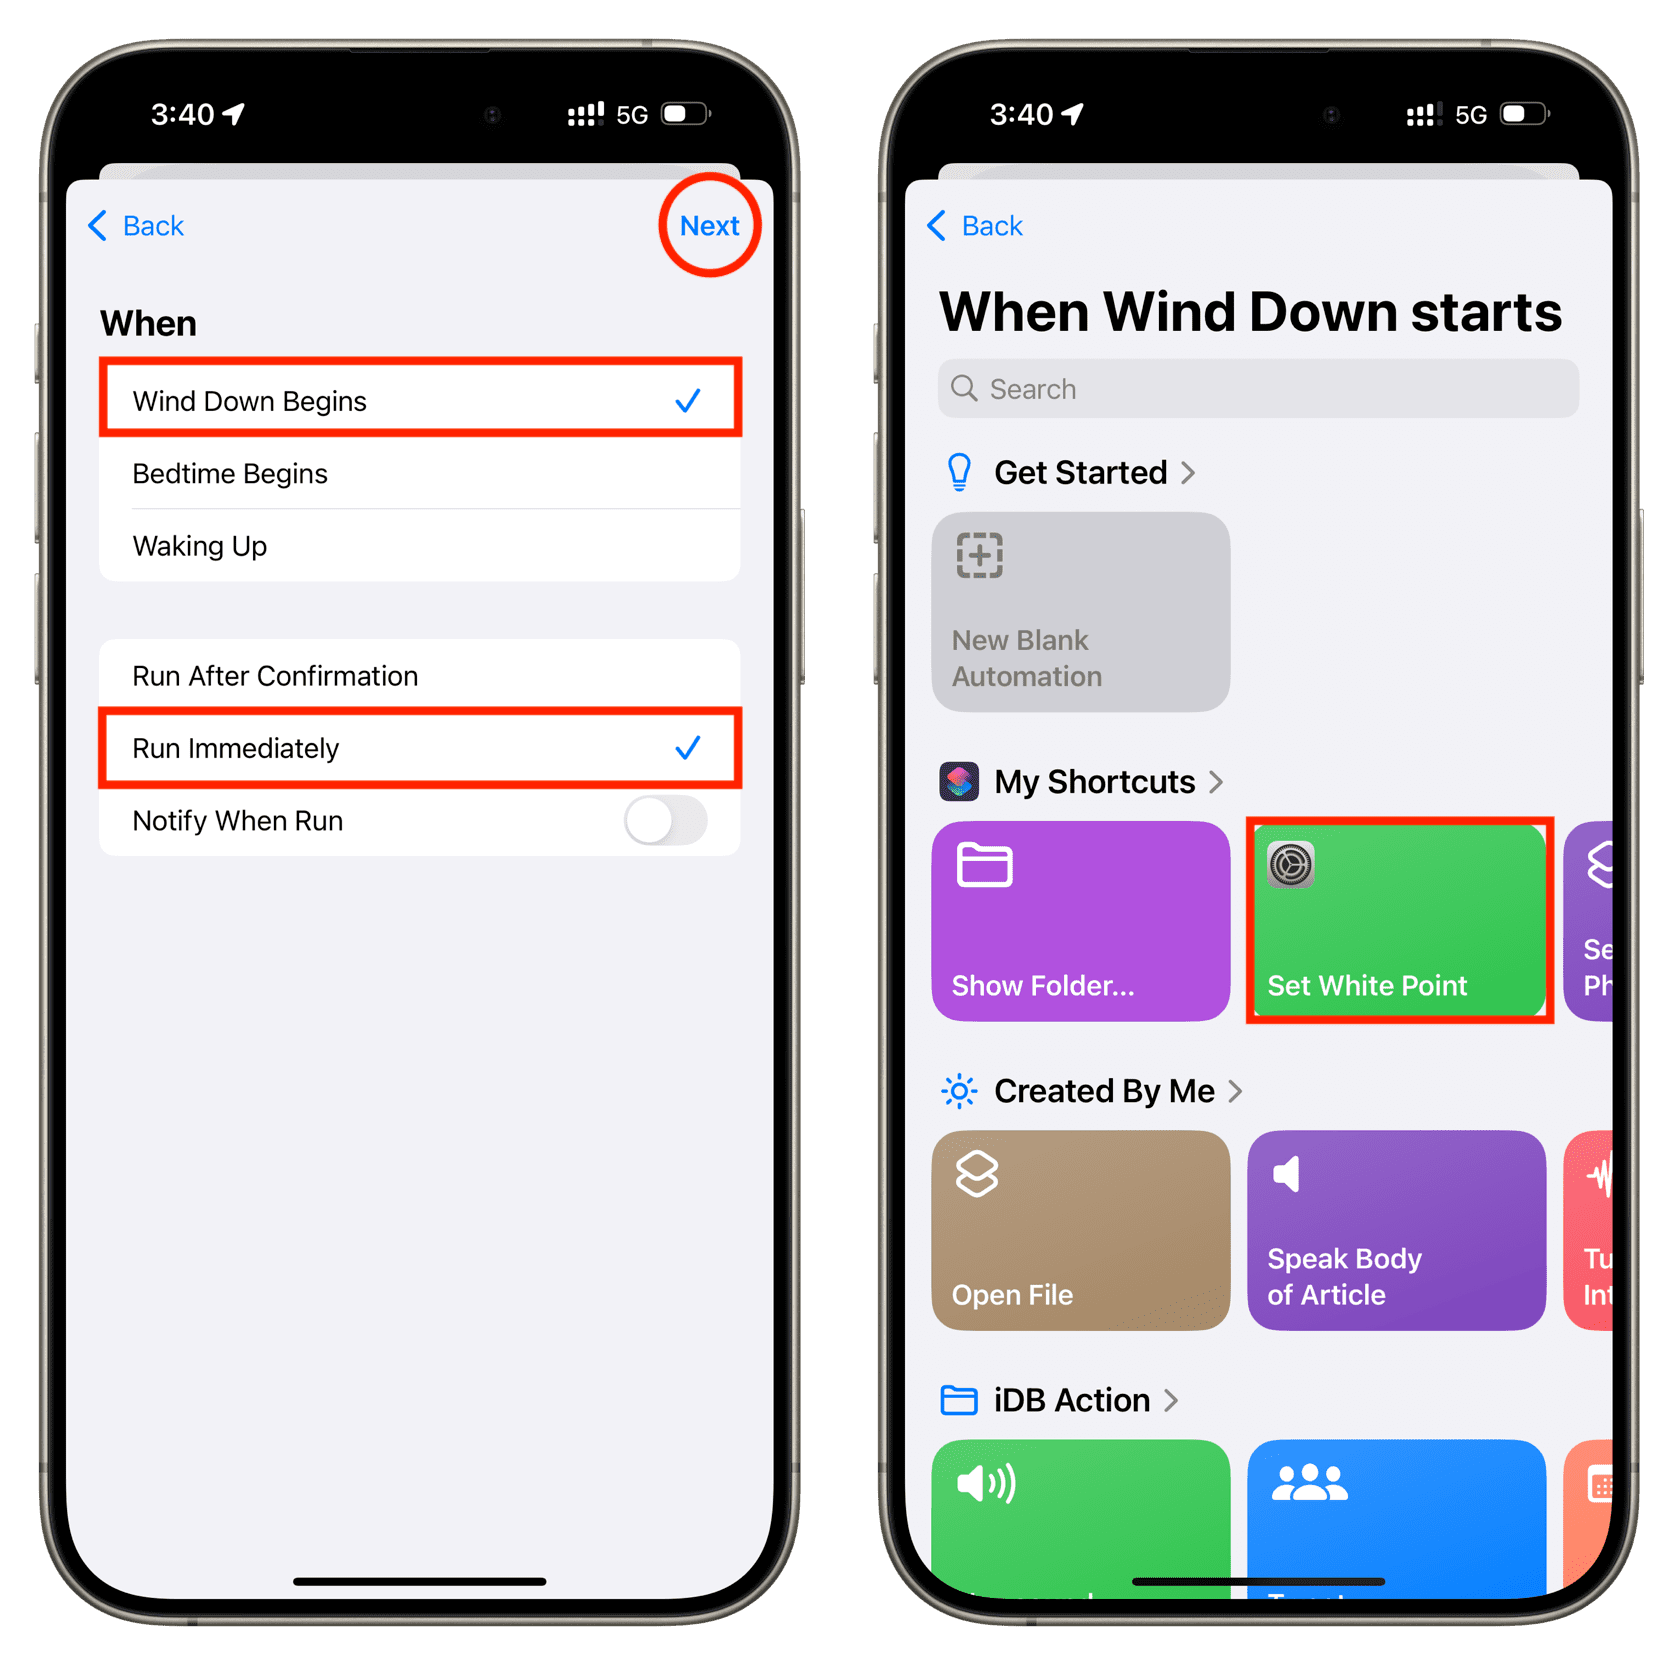 Turn on White Point when Wind Down Begins on iPhone